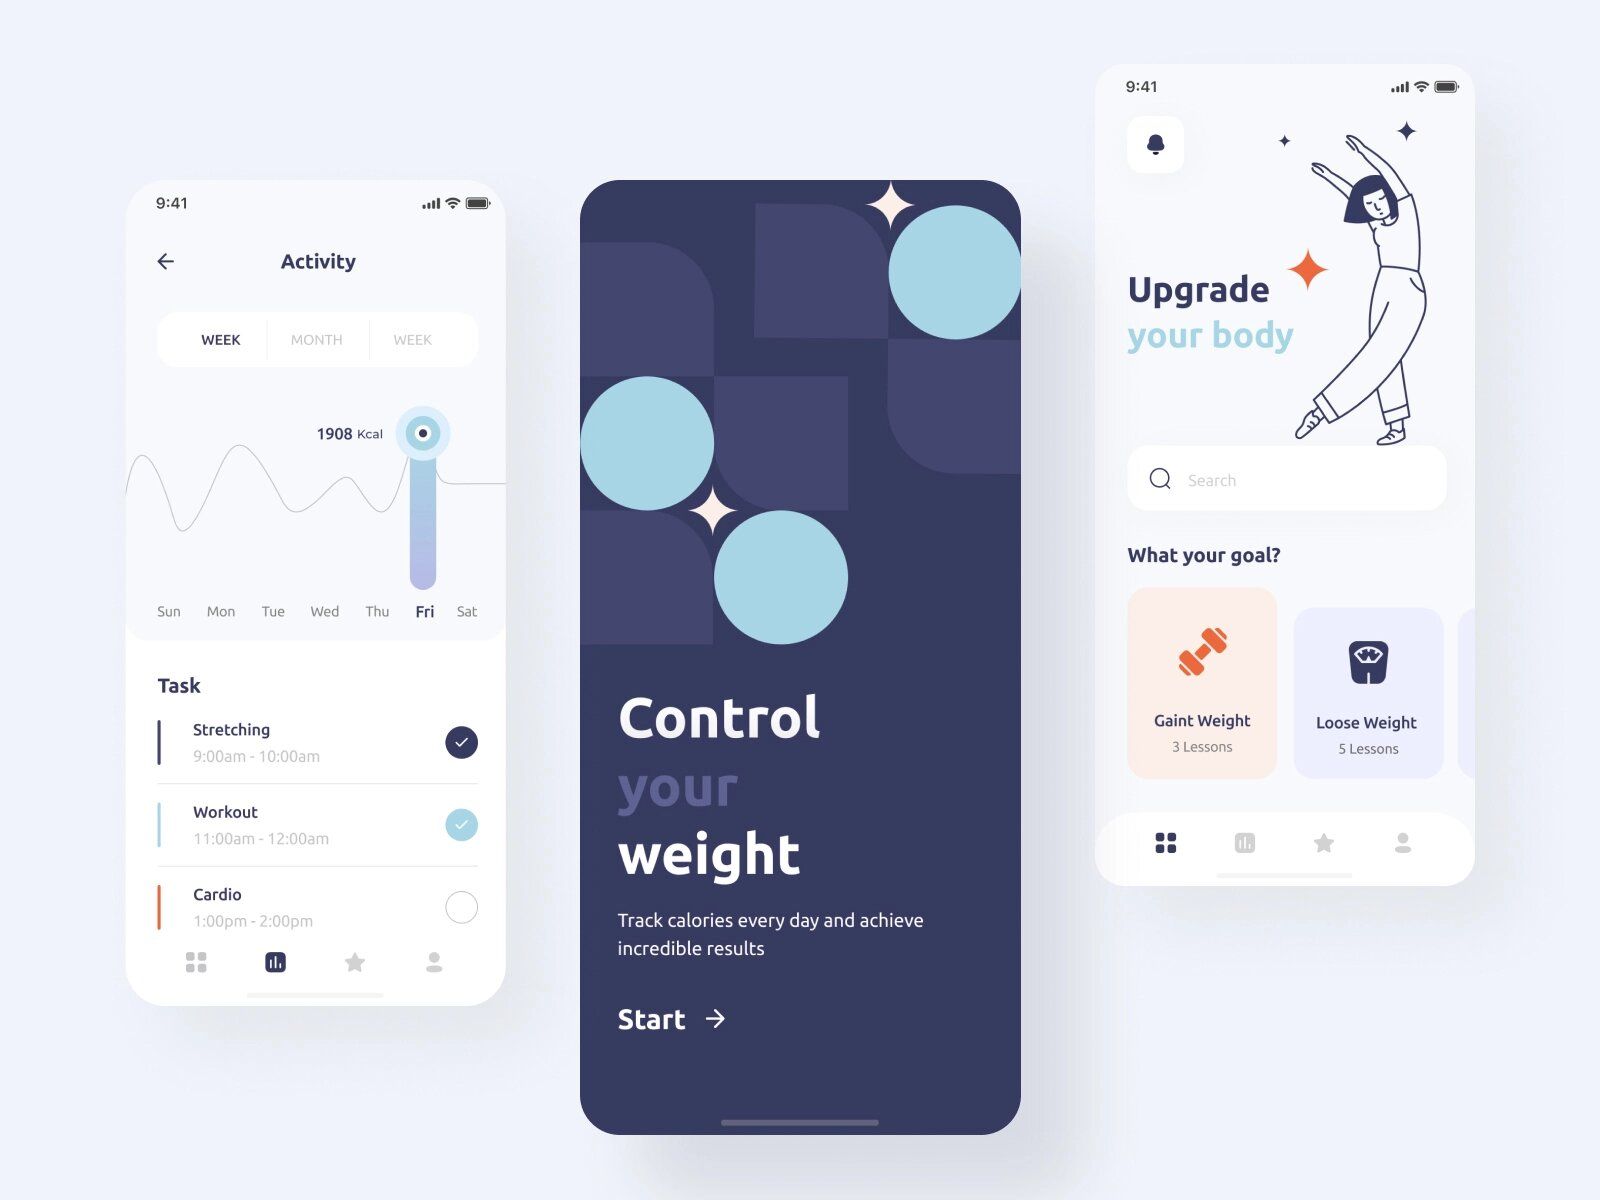 If you build an app for your small business, you increase the number of potential buyers since you get access to new marketing and communication channels (*image by [Taras Migulko](https://dribbble.com/ui_migulko){ rel="nofollow" target="_blank" .default-md}*)